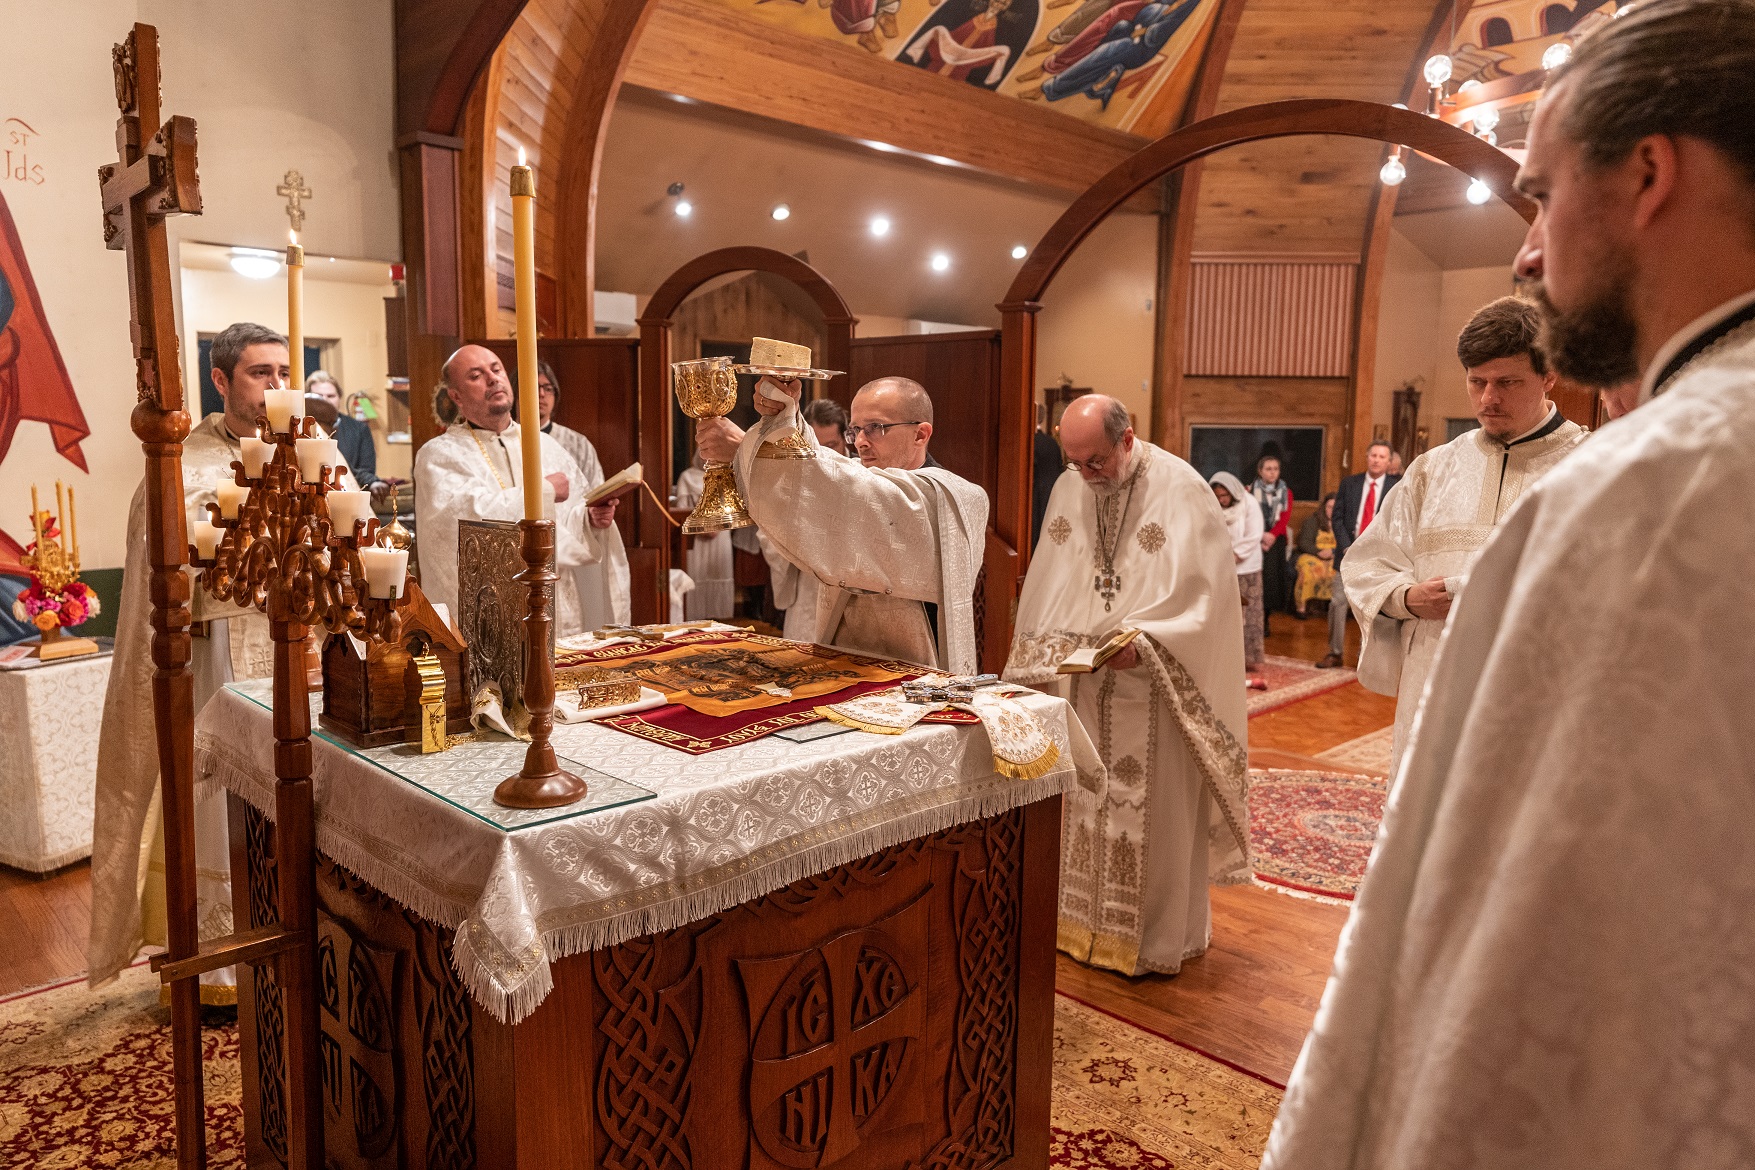 Fr Chad holds up paten and chalice during Pascha liturgy with clergy surrounding the altar